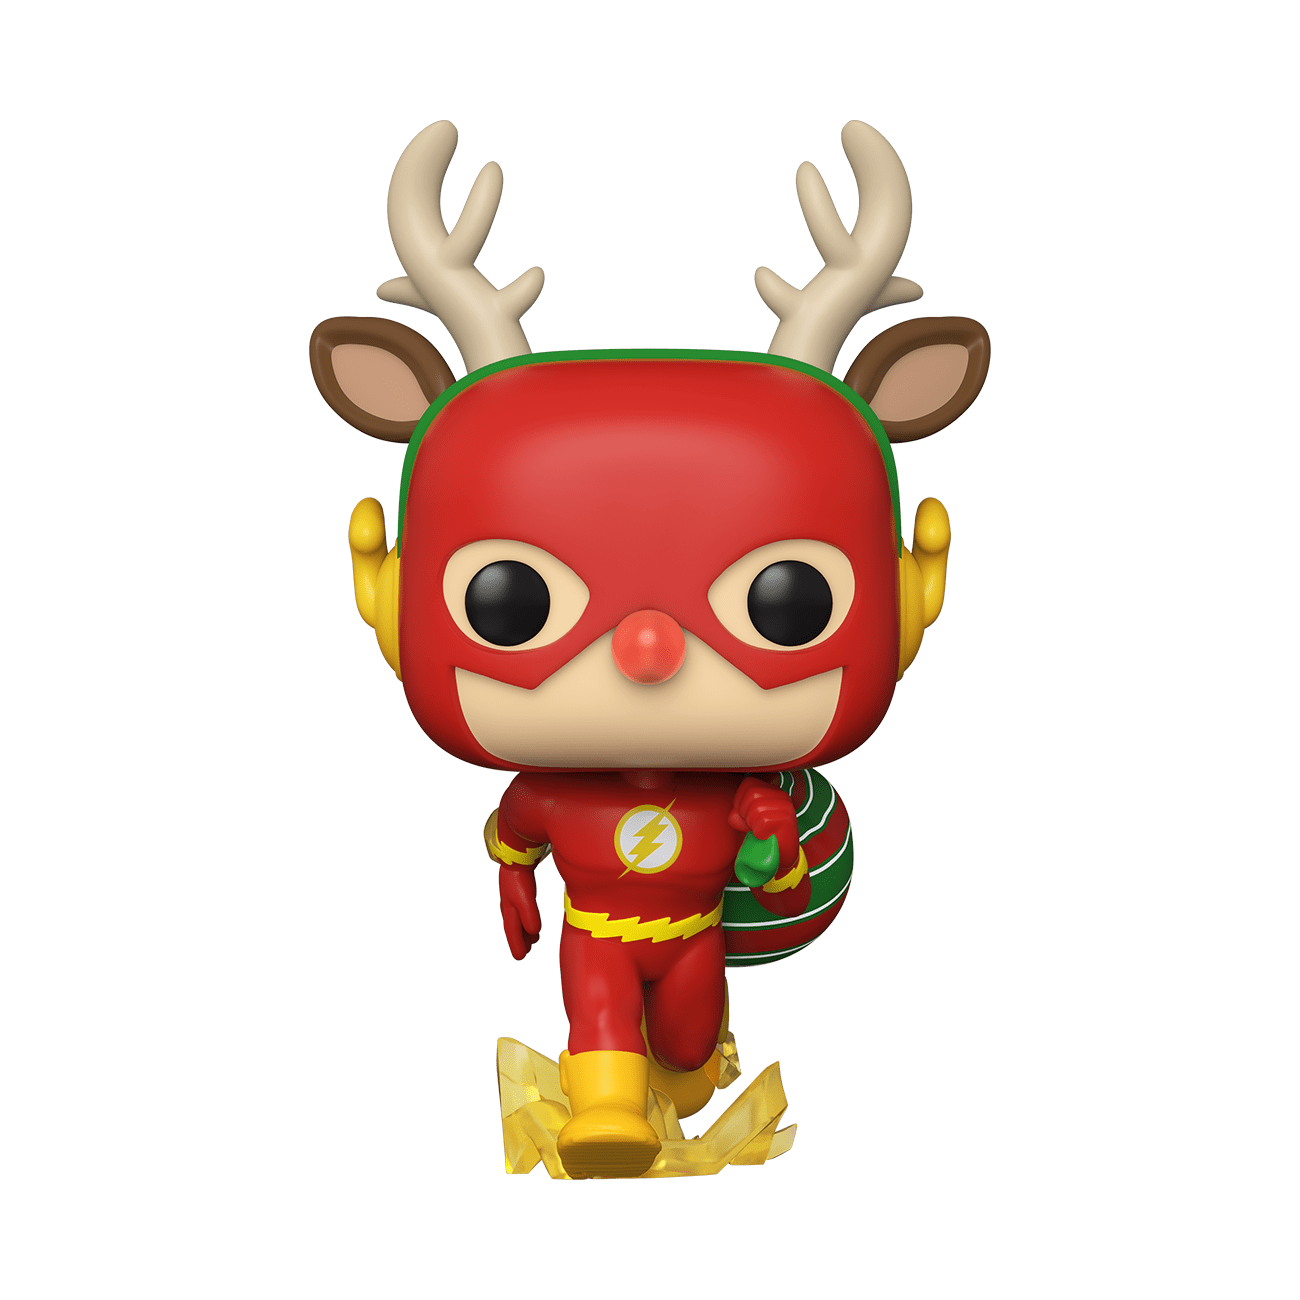 NEW 2020 Flash as Rudolph Reindeer Plushies DC Super Heroes Christmas 8" Tallx7" 